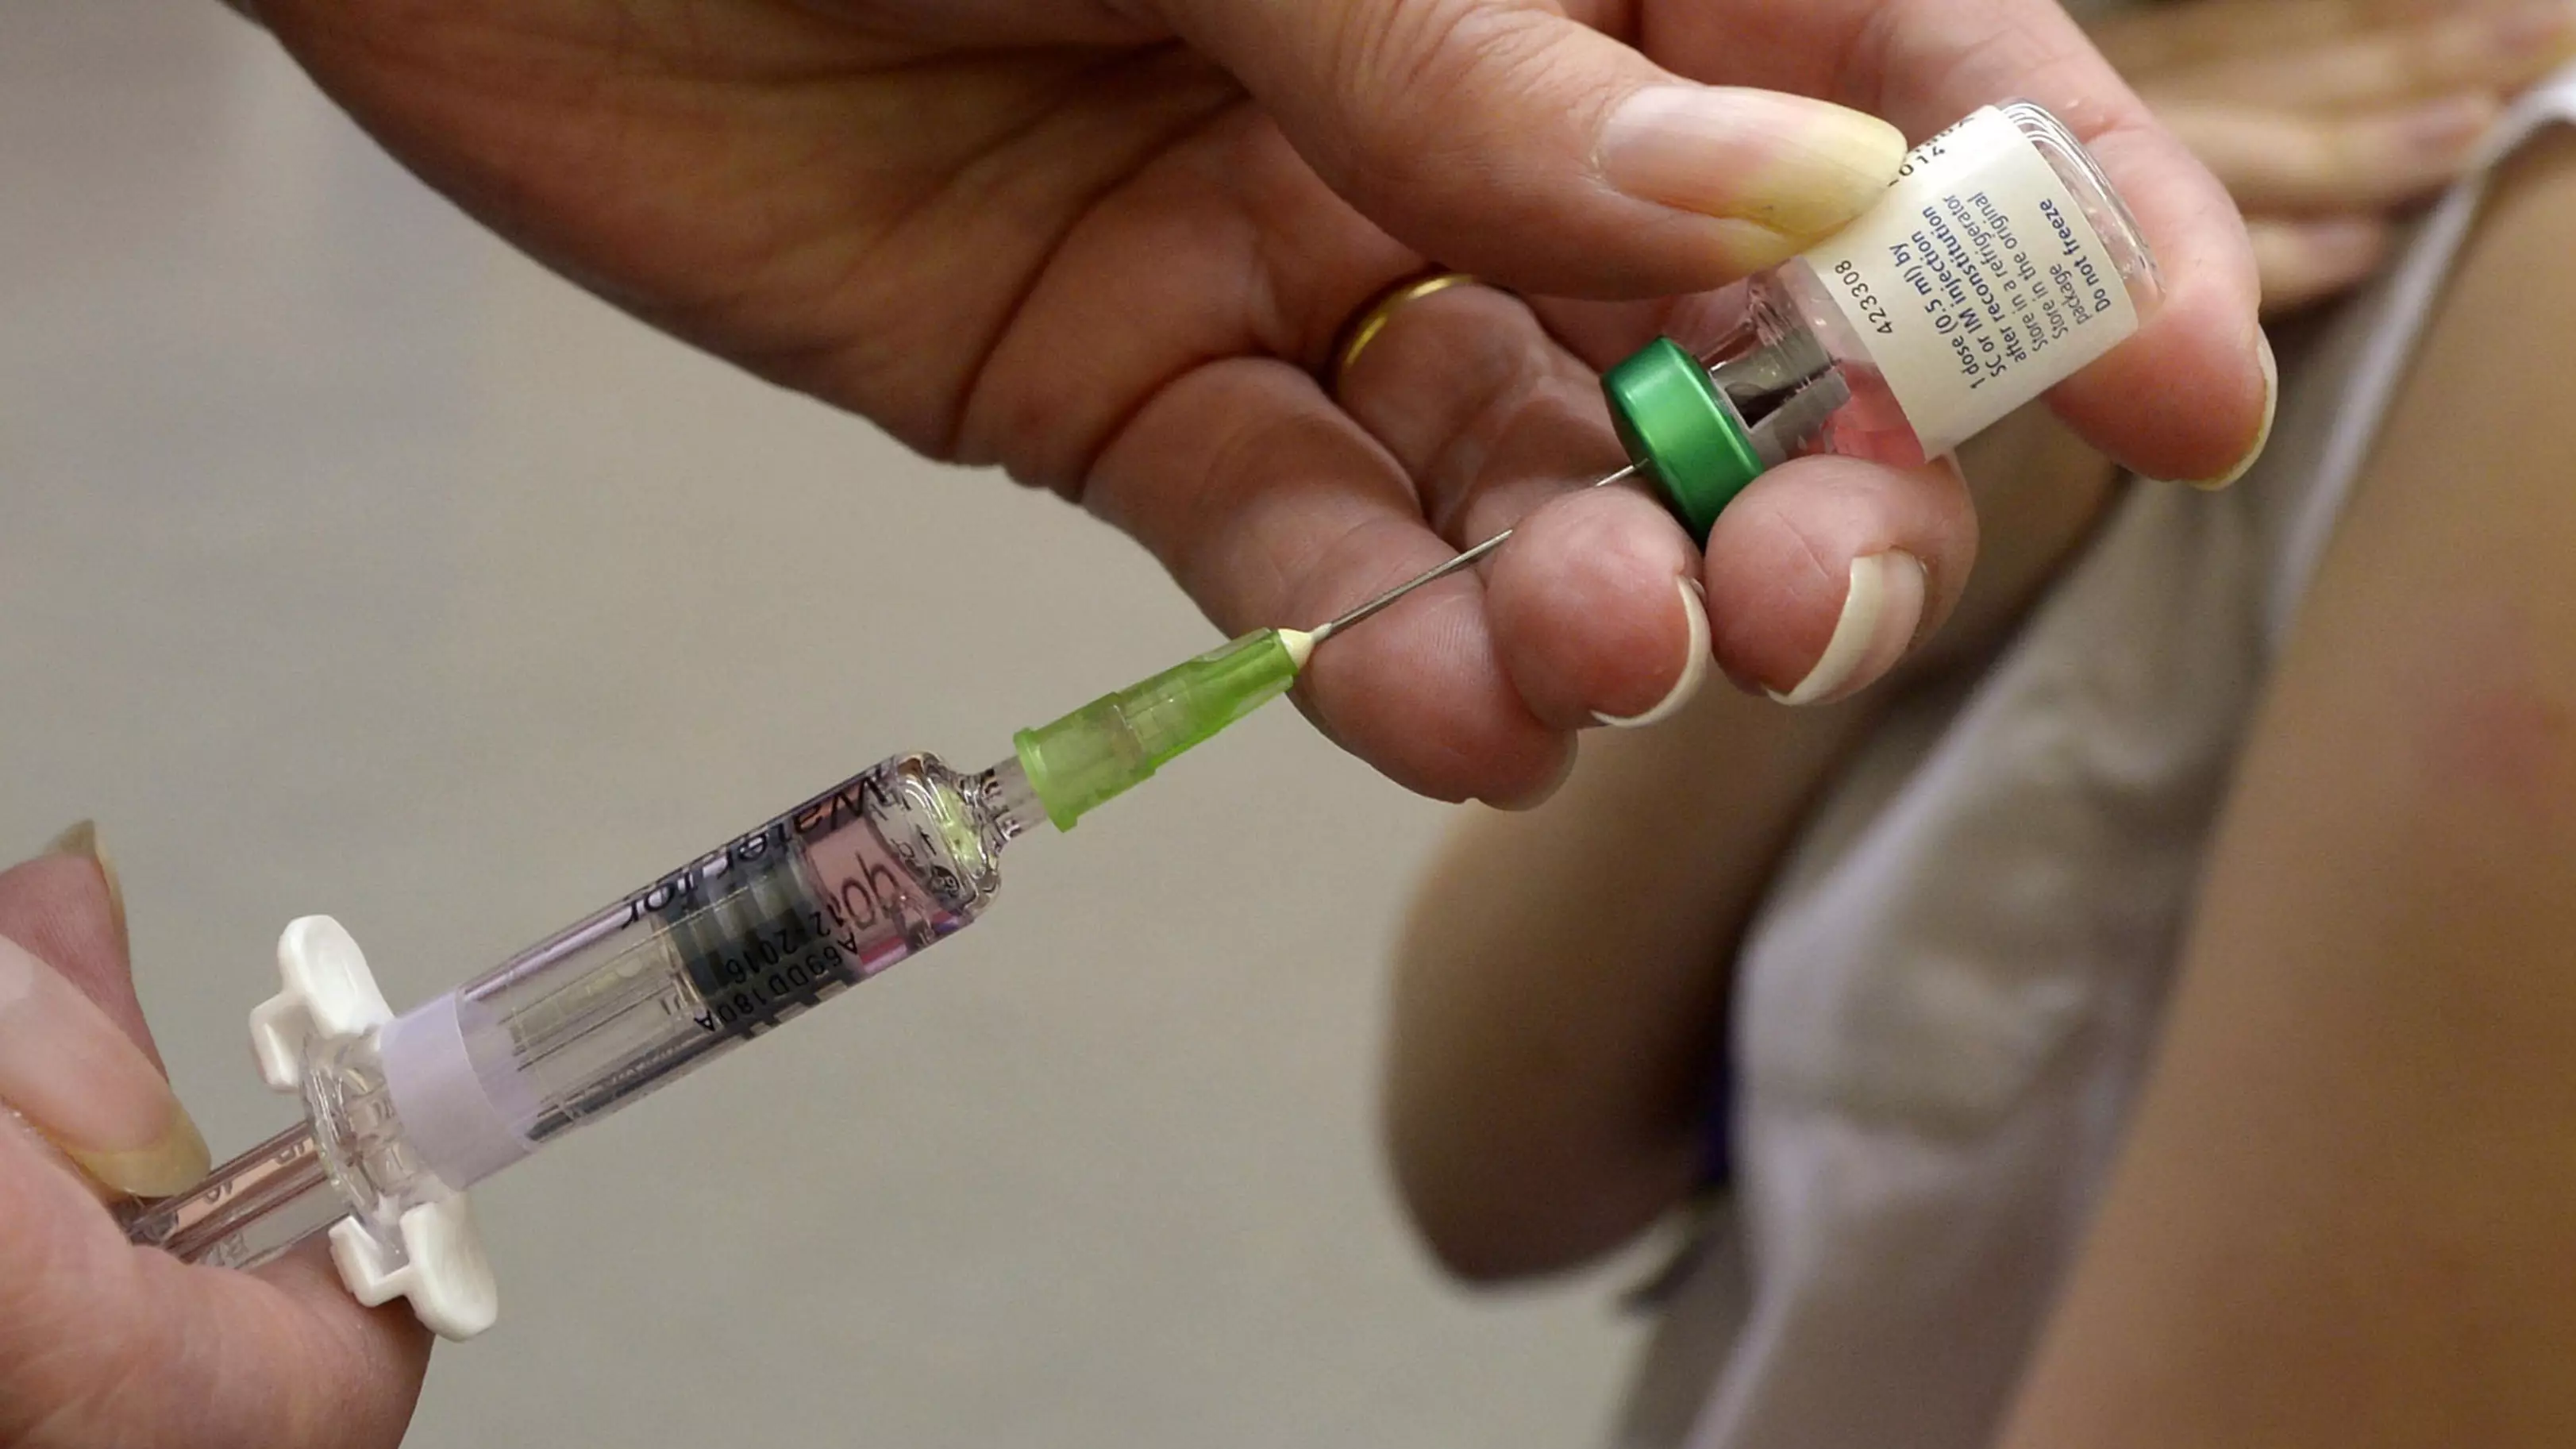 Over 15,000 Irish People Have Already Been Vaccinated Against COVID-19